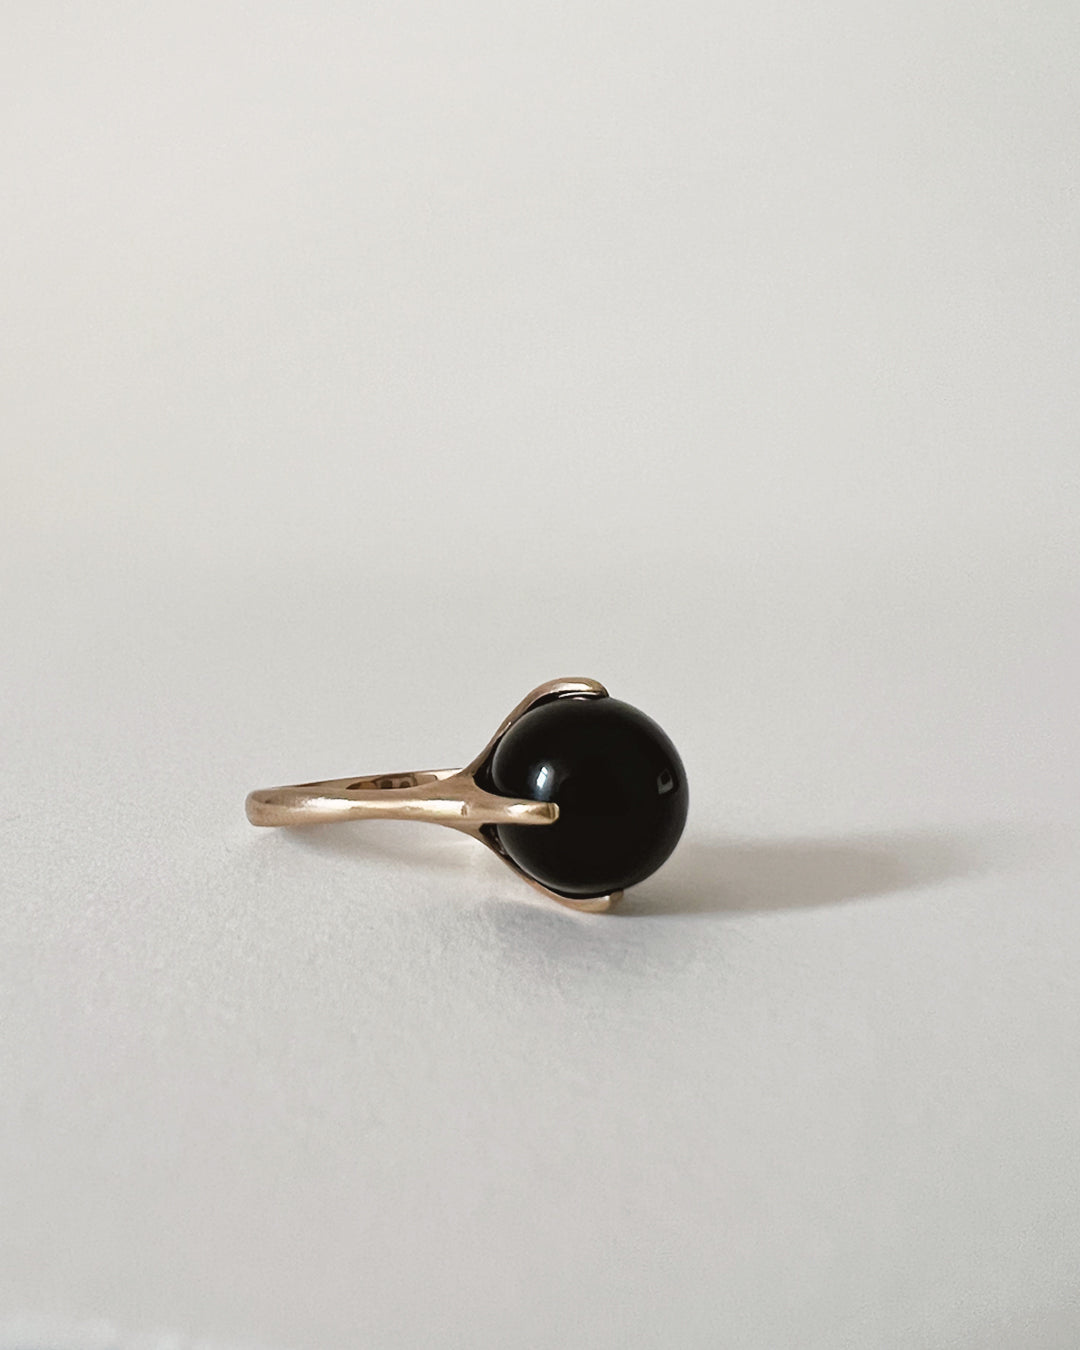 STATEMENT SPHERE ONYX RING, 9CT GOLD